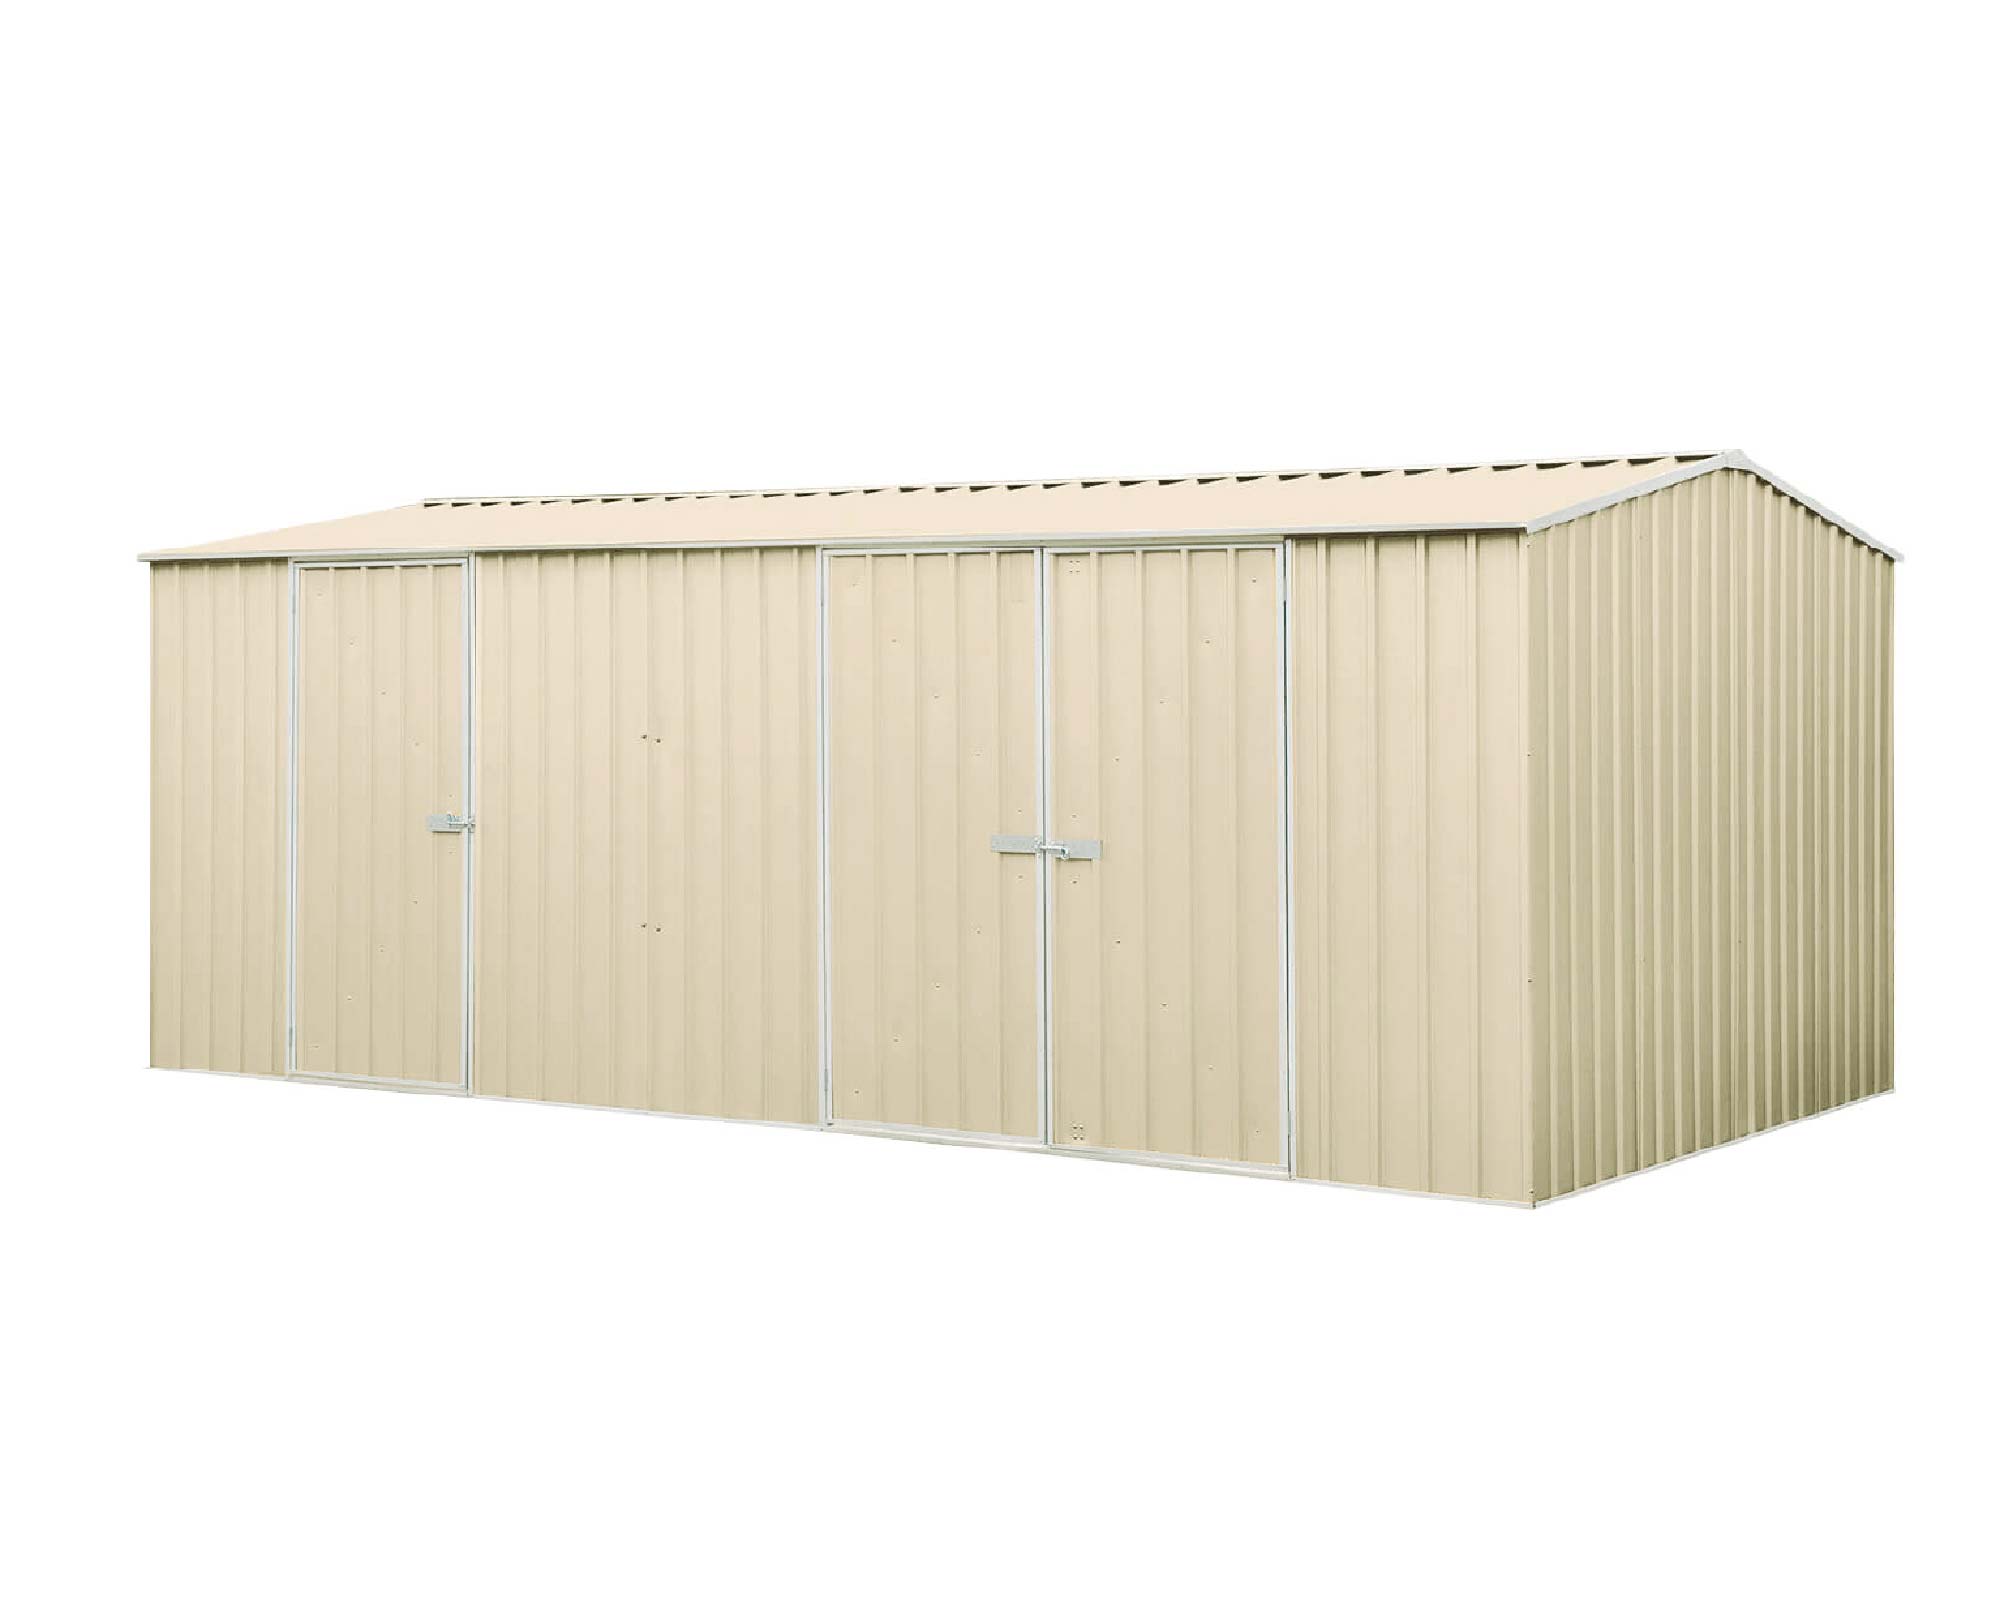 Eco-Nomy 3 Door Workshop Shed Kit - 5.22 x 2.26 x 2.06 colour Classic Cream